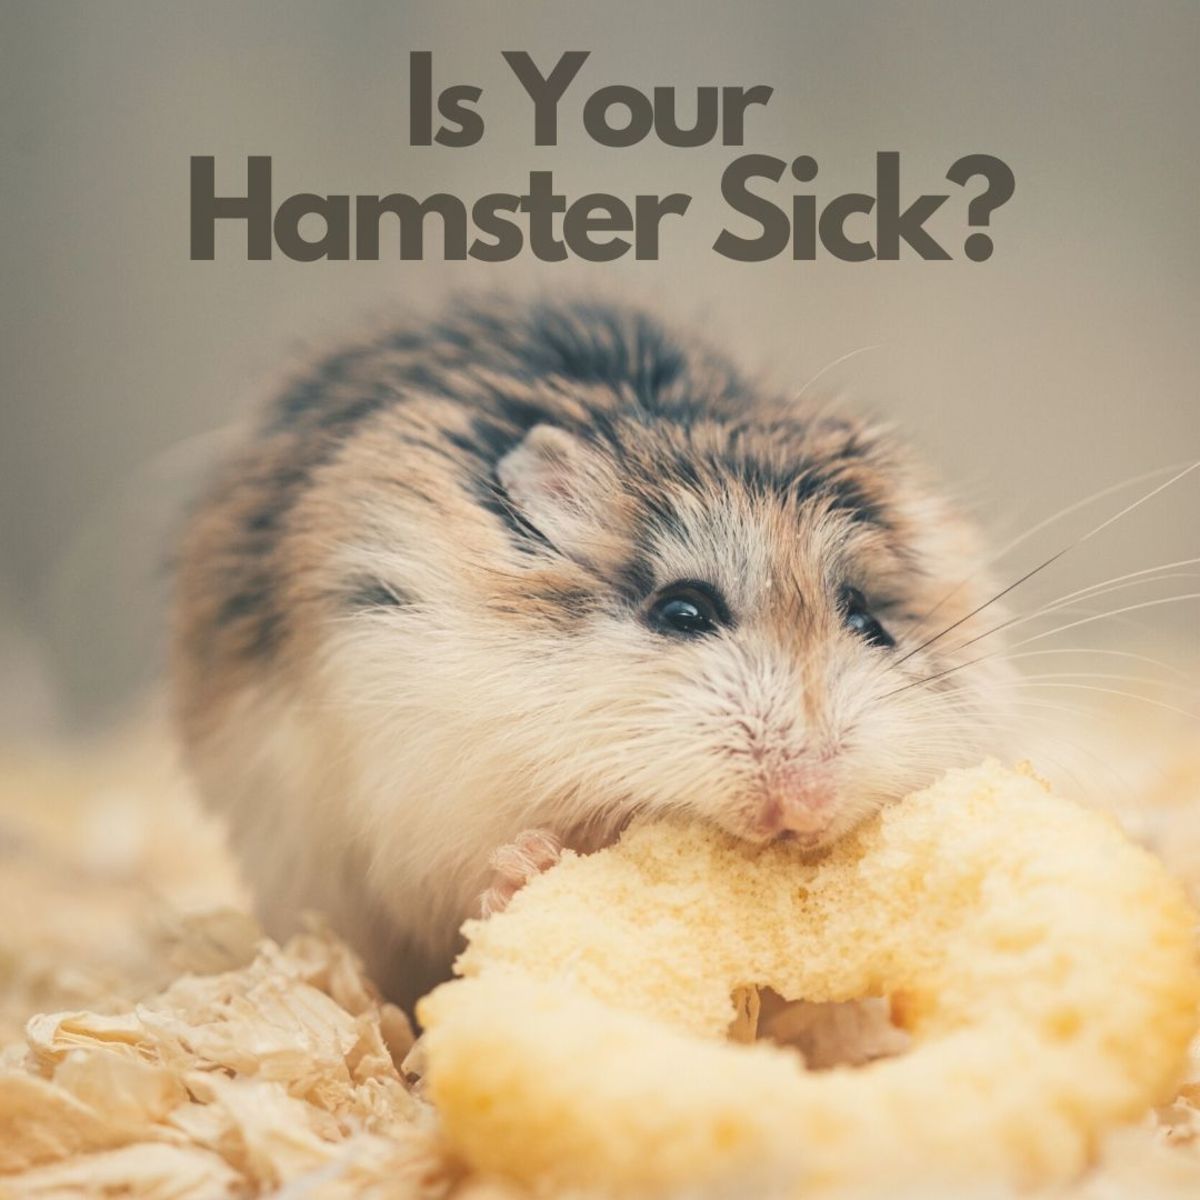 Signs of Allergies and Sickness in Hamsters